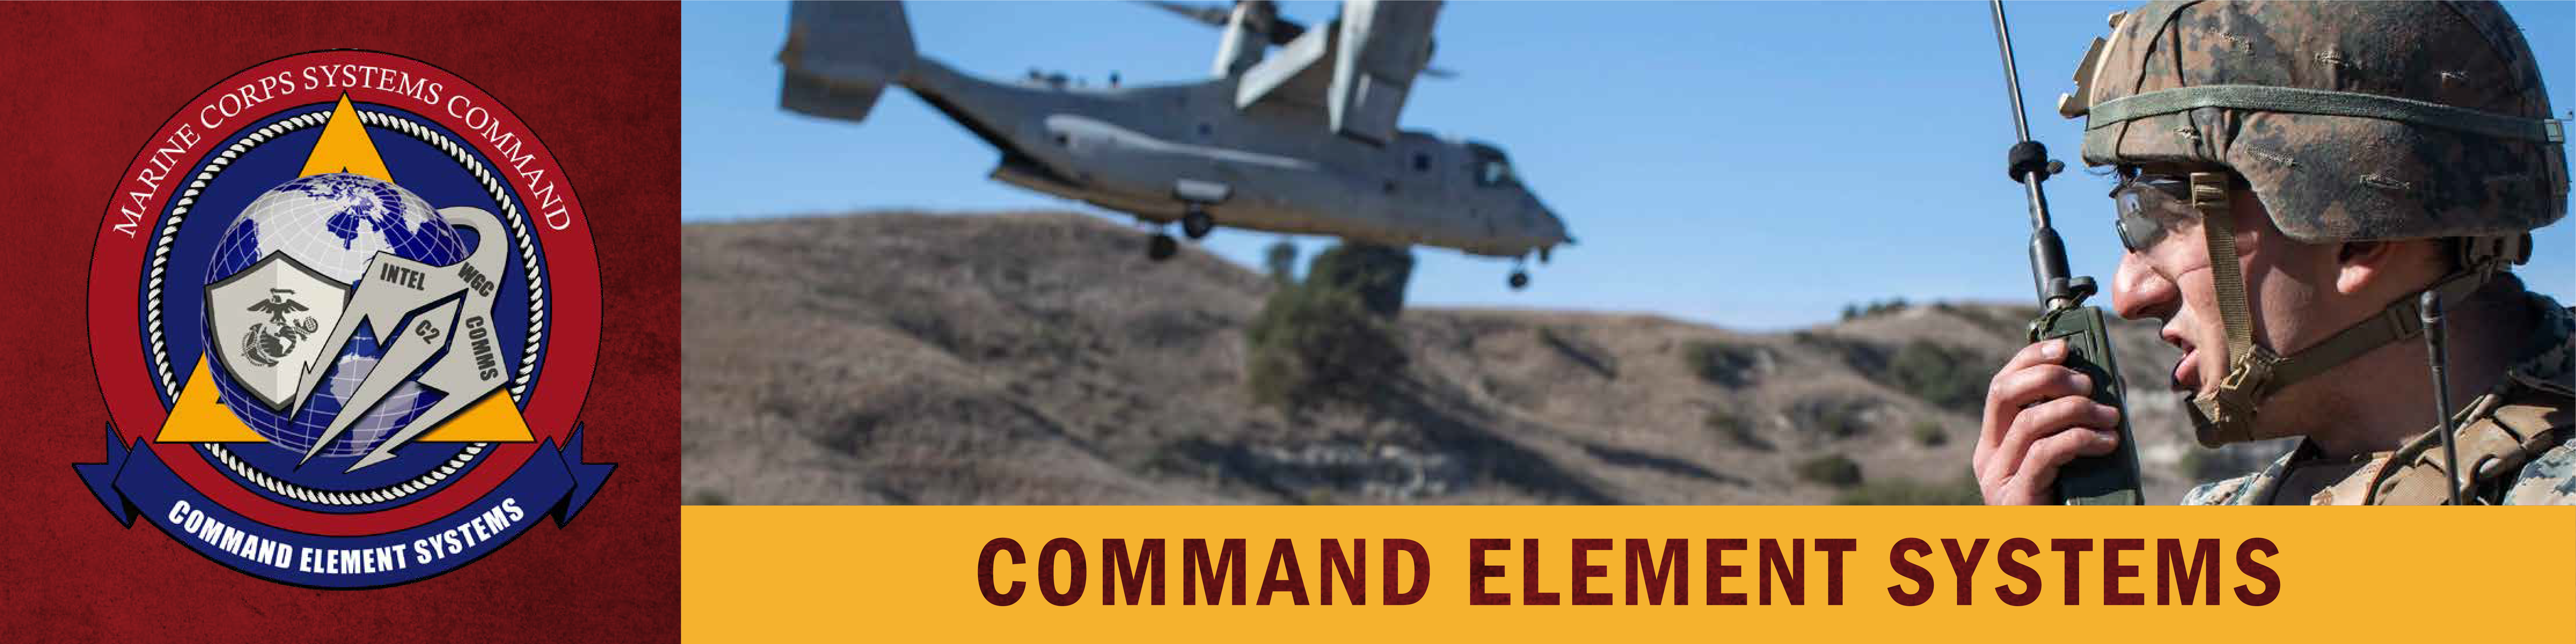 Graphic with seal for CES, includes photo of a marine talking on a radio, text below reads Command Element Systems